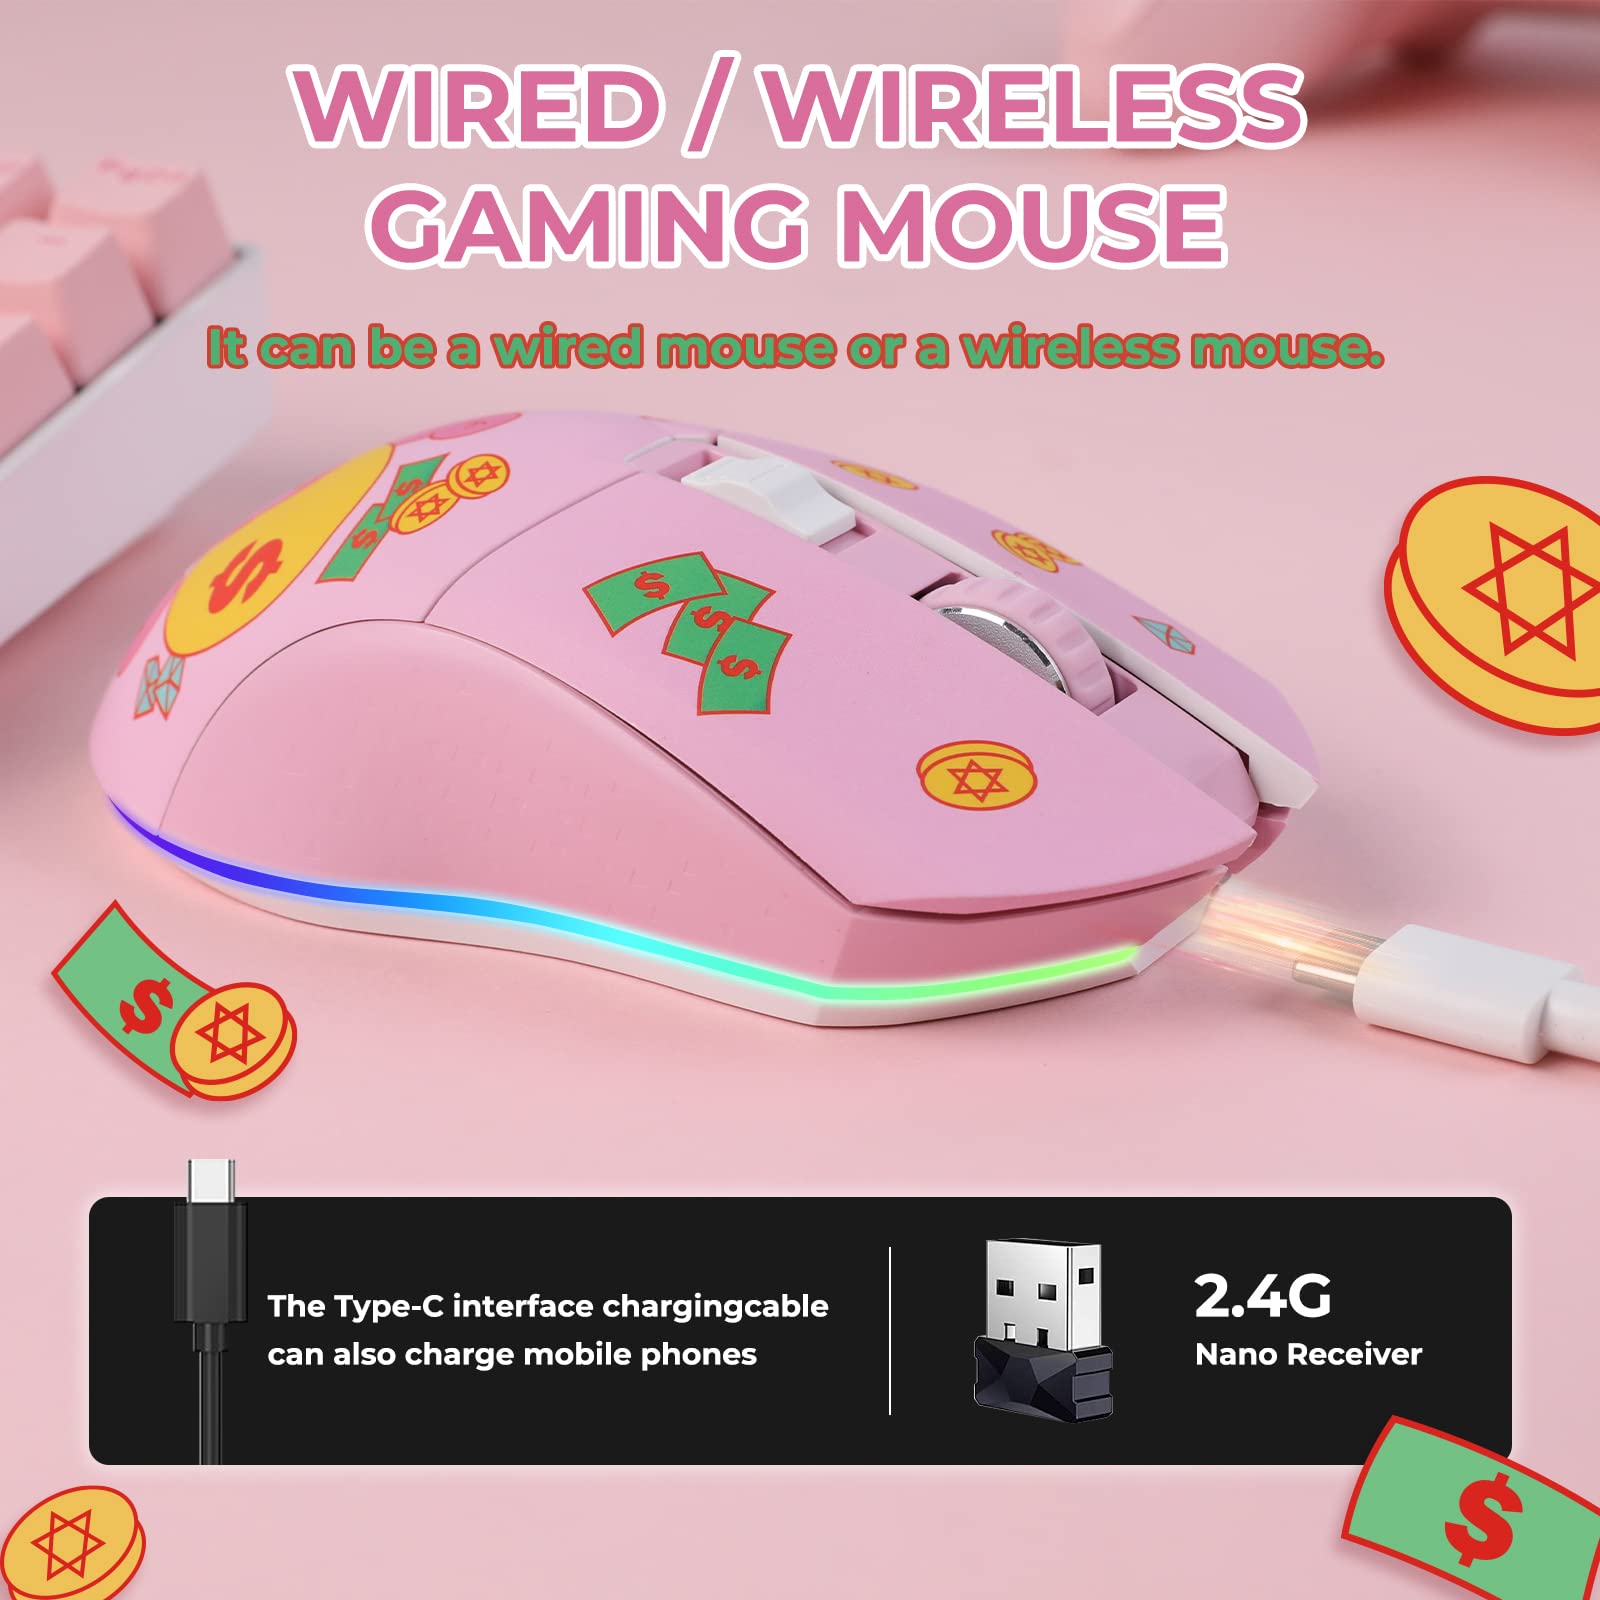 DAREU Pink Wireless Wired Gaming Mouse, Dual-Mode Rechargeable 7 Programmable Buttons,10K DPI,RGB and 7 Adjustable DPI Levels up to [150IPS] [1000Hz] for PC Notebook Mac(Lucky Bear)